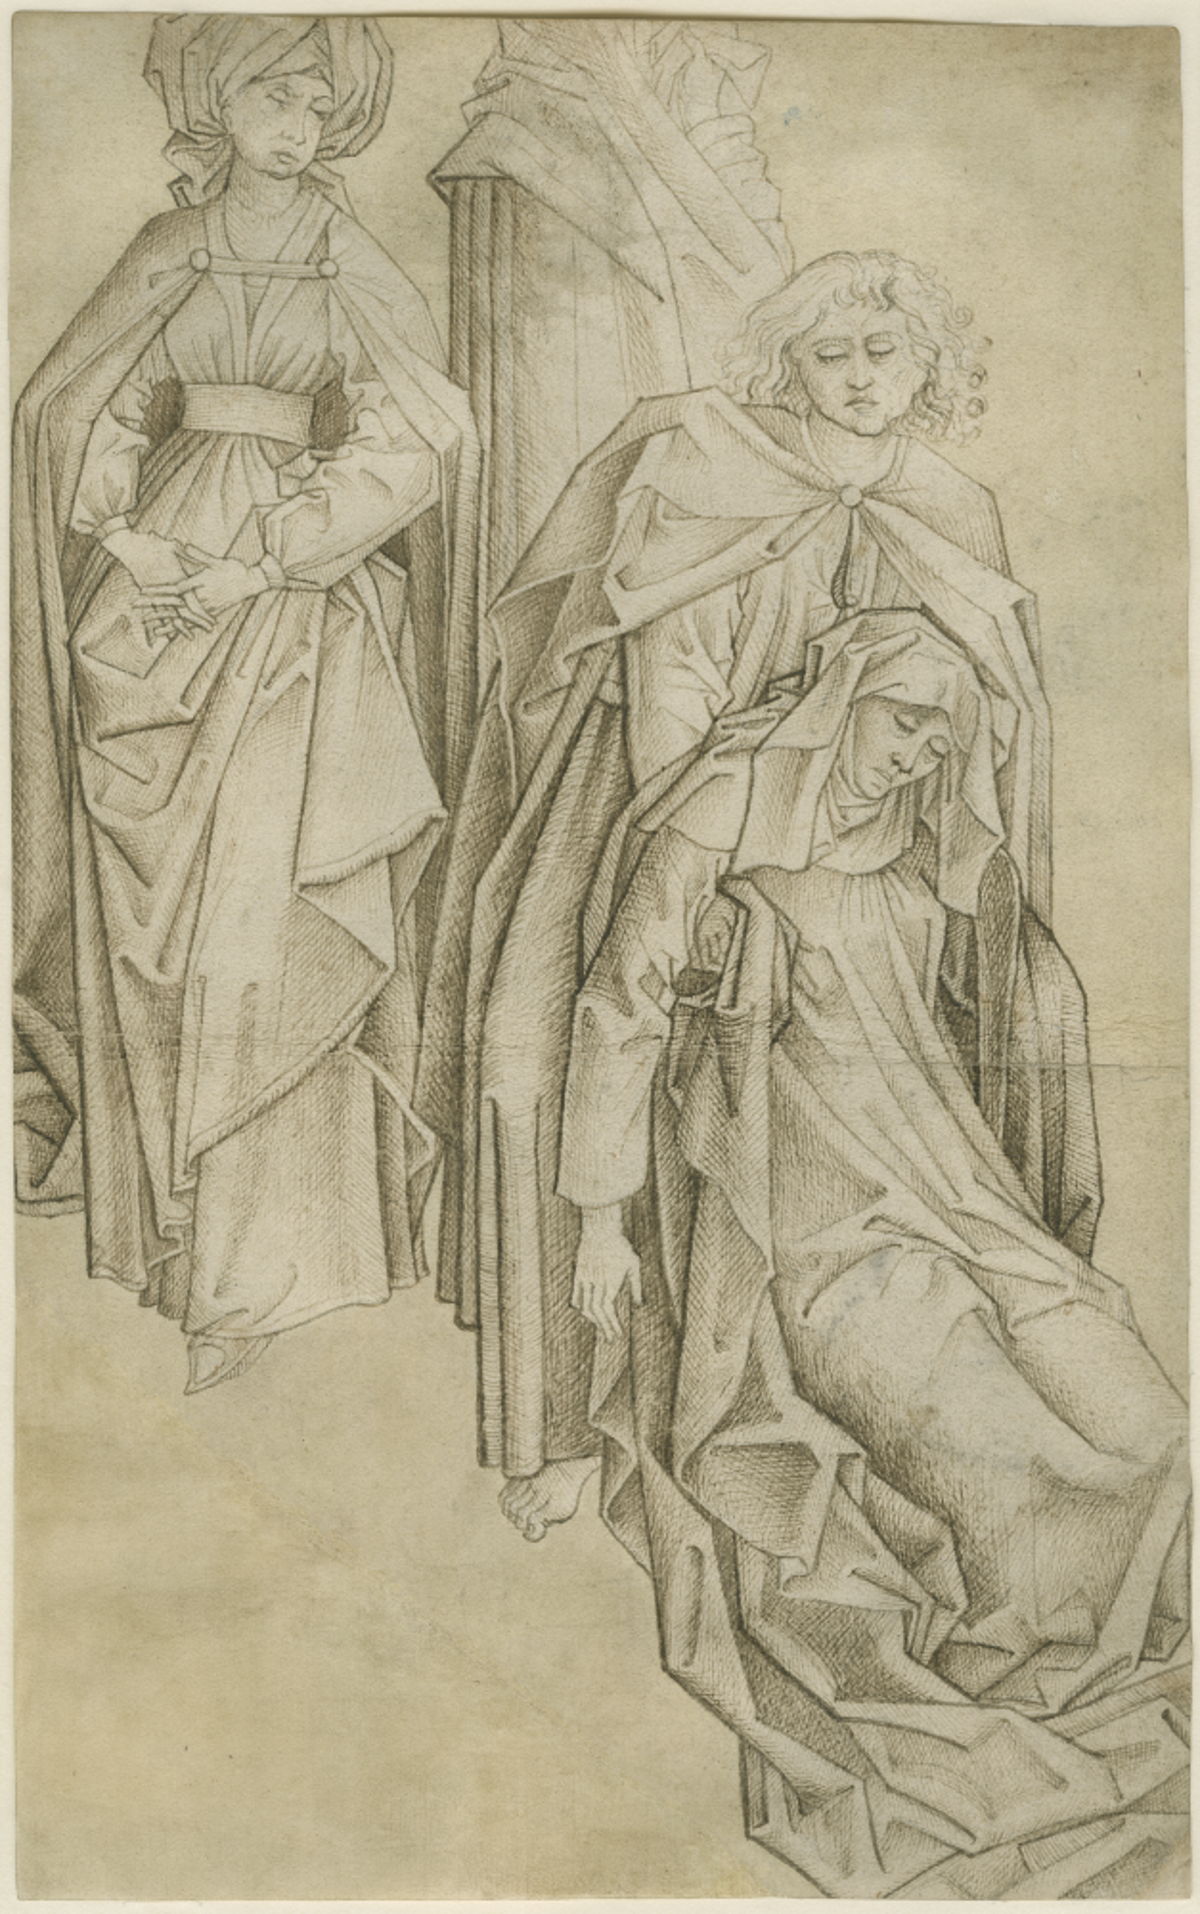 Circle of Rogier van der Weyden, 'The Swooning of the Blessed Virgin and two Marys', ca. 1458-1469, drawing, ink on paper, 332 x 208 mm, collection M Leuven, photo M Leuven